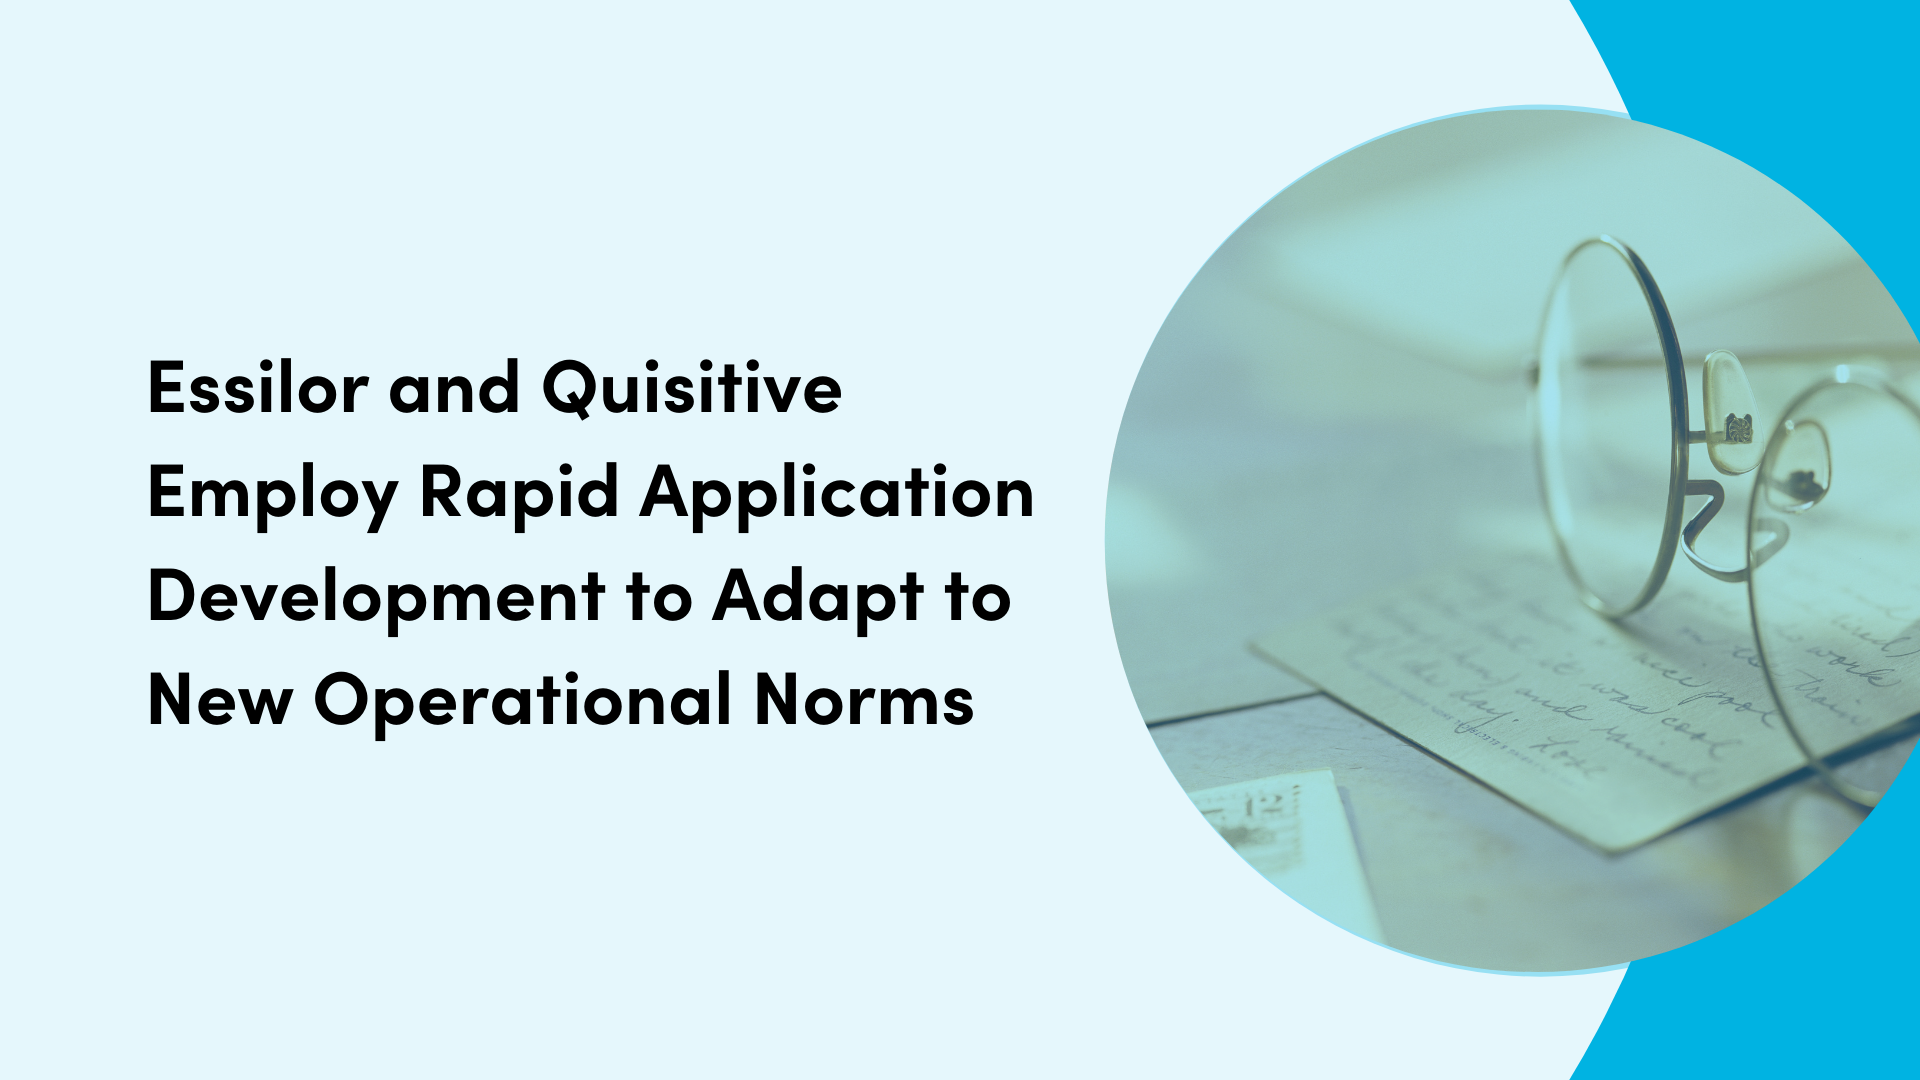 Photo of glasses on blue background and texts that reads "Essilor and Quisitive Employ Rapid Application Development to Adapt to New Operational Norms"